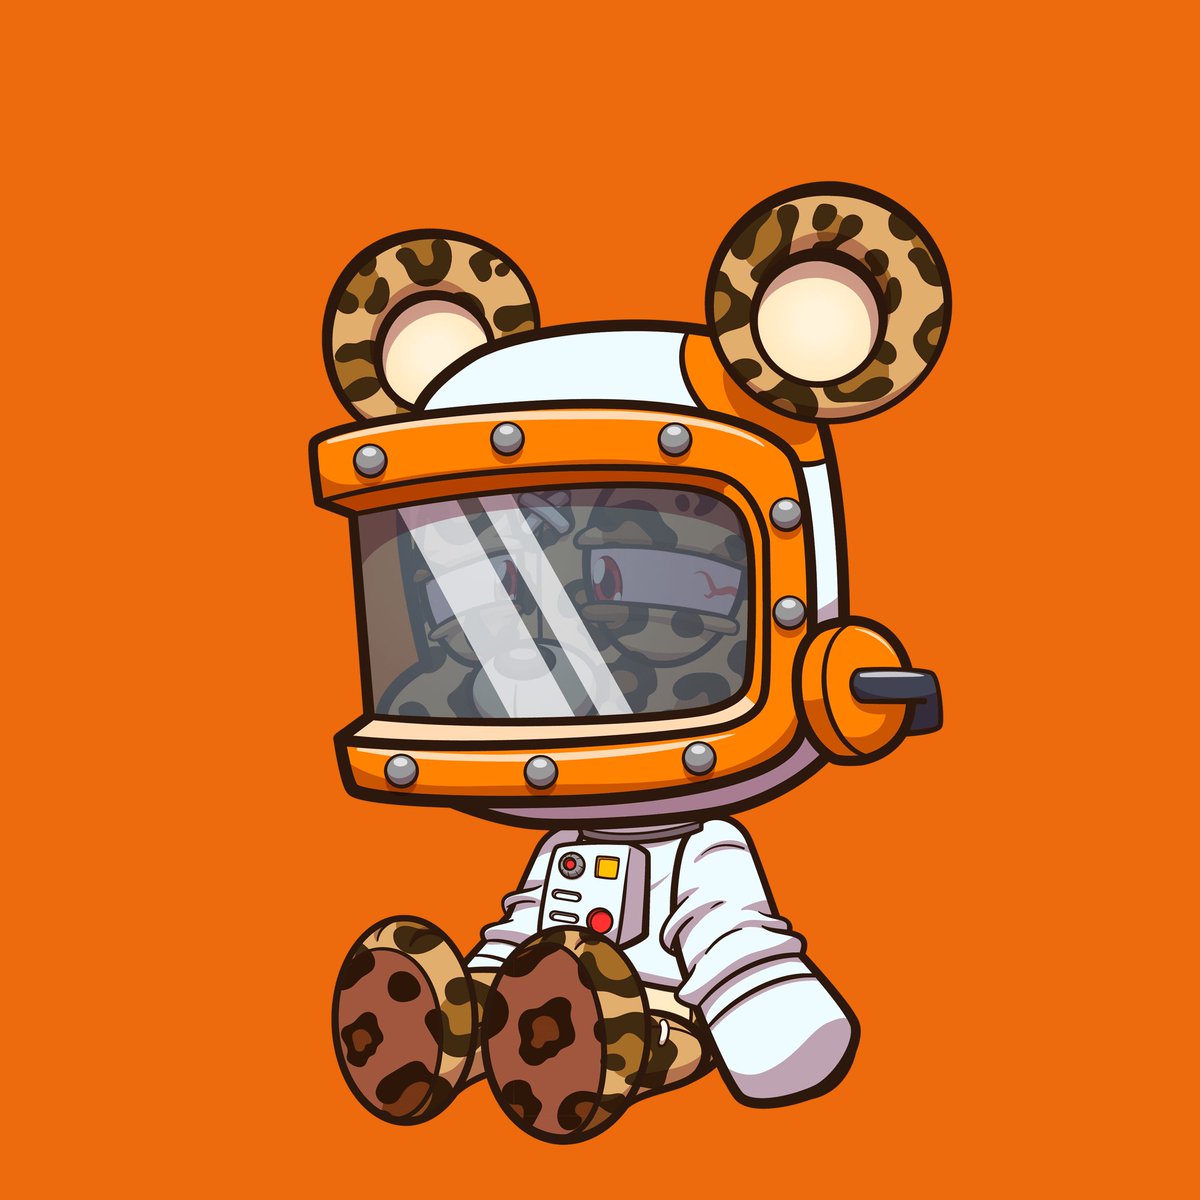 I have been waiting since literally the first week of @killabearsnft to build my full body astronaut cub. 

Today is the day it happened. 

Someone got too high 💨 and ended up in outer space. 👨‍🚀 

#KillaCubs